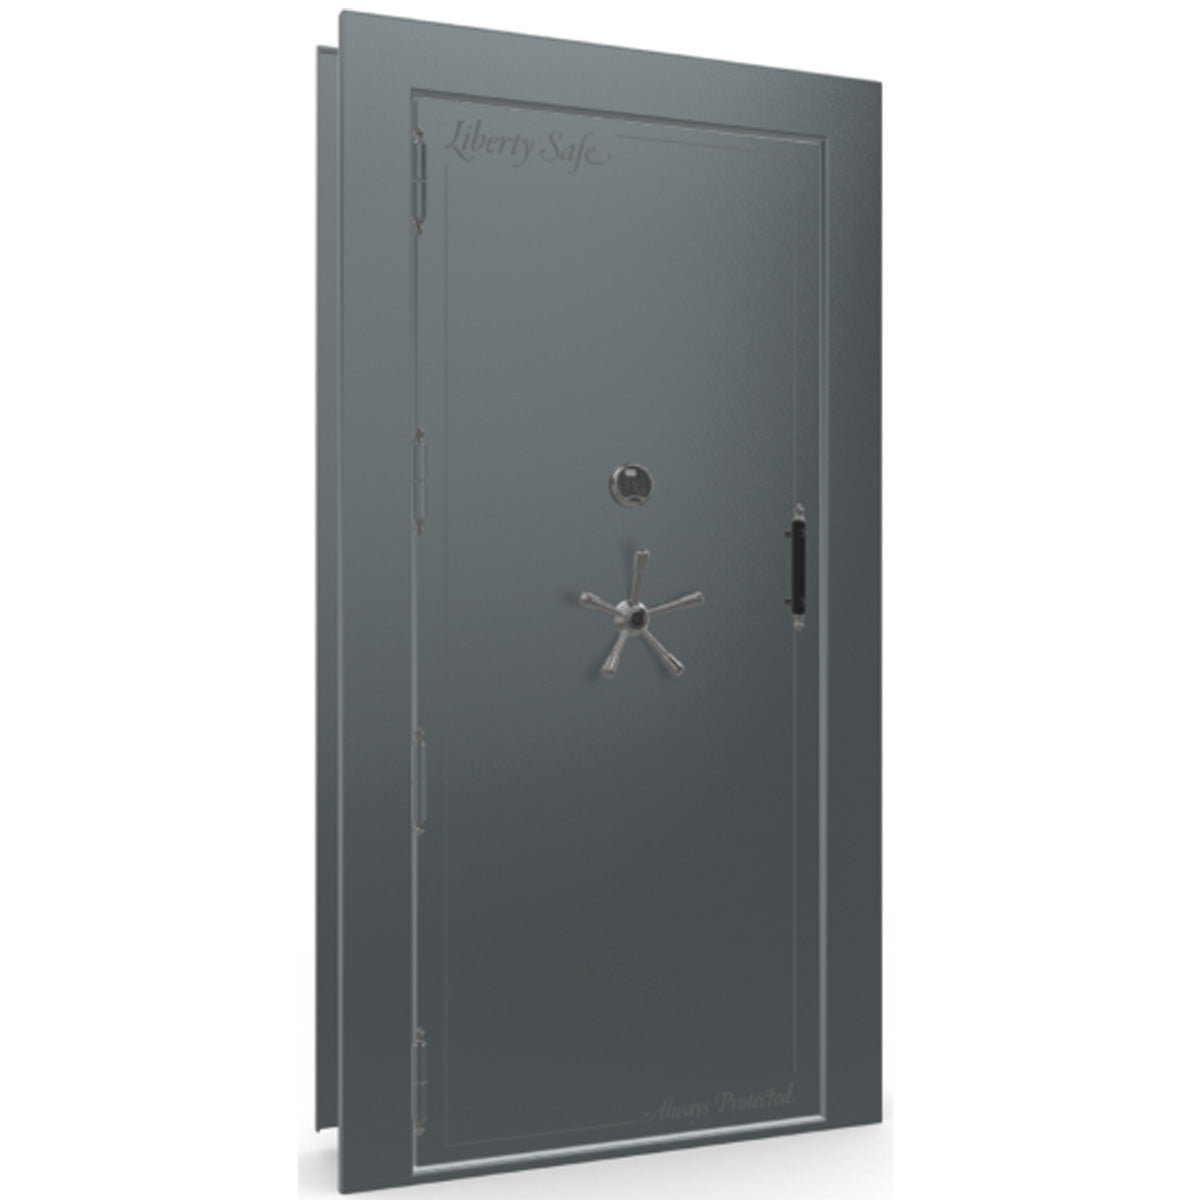 The Beast Vault Door in Forest Mist Gloss with Black Chrome Electronic Lock, Left Outswing, door closed.